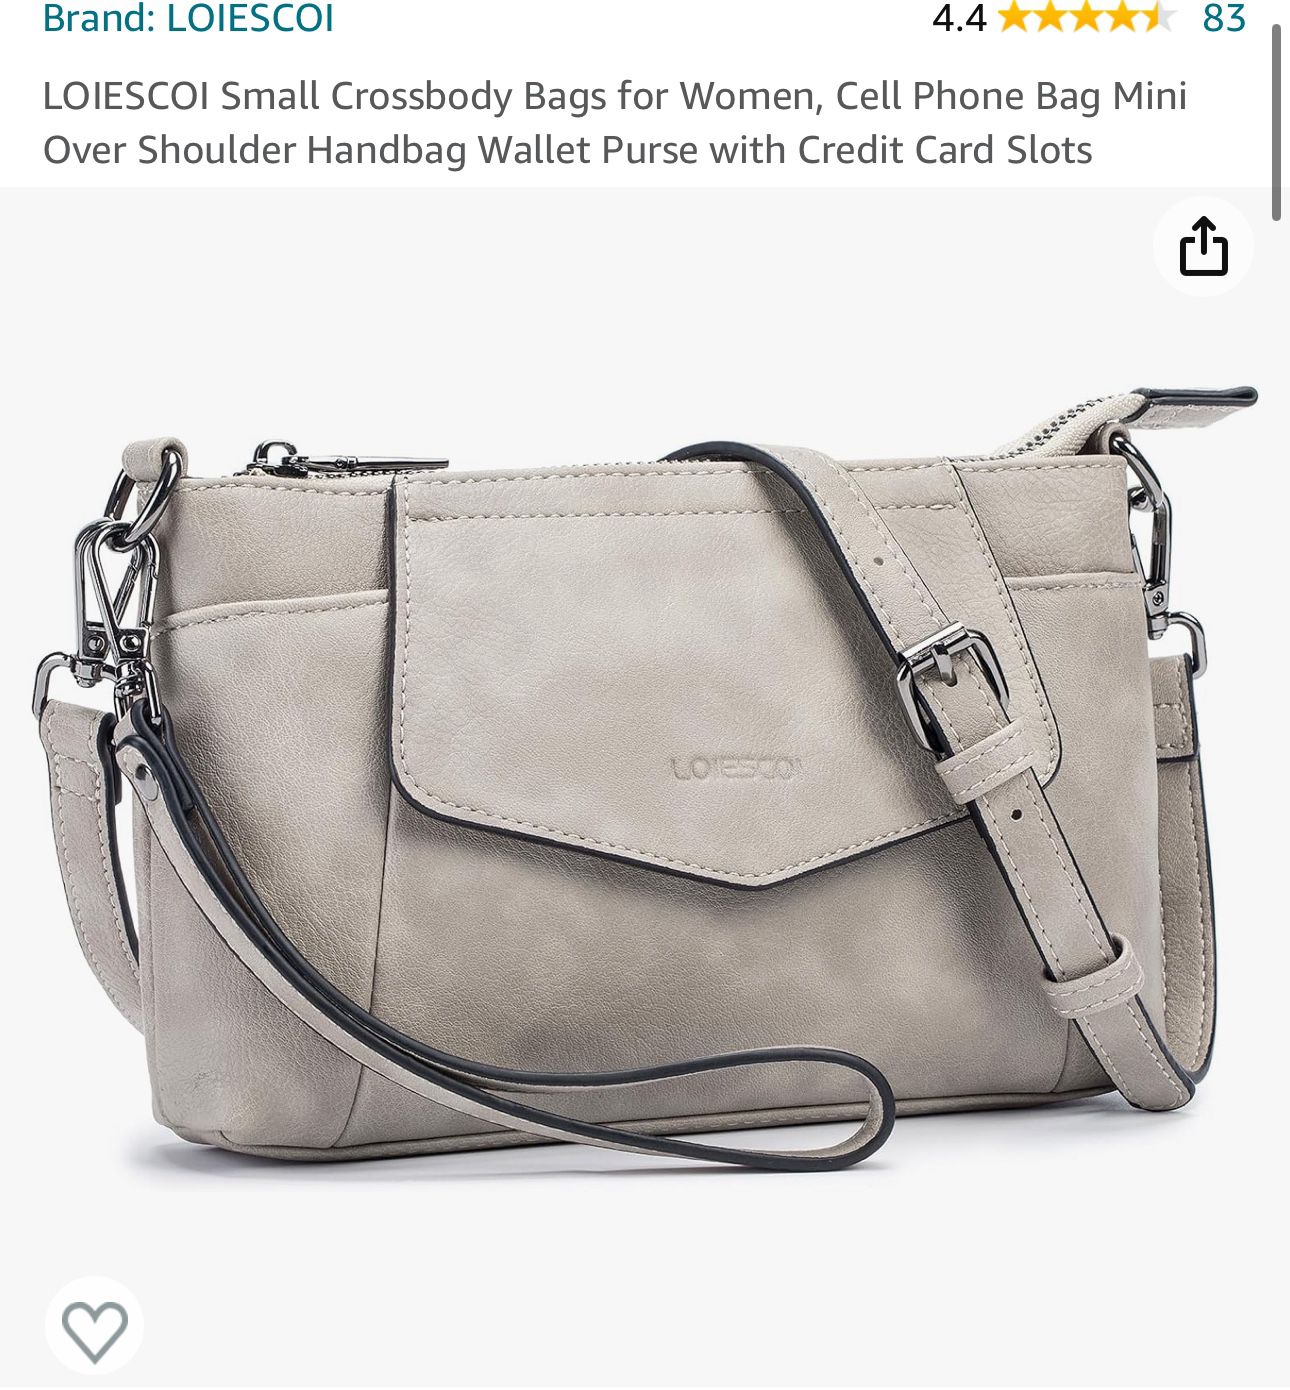 LOIESCOI Small Crossbody Bags for Women, Cell Phone Bag Mini Over Shoulder Handbag Wallet Purse with Credit Card Slots (Grey & Brown Available)